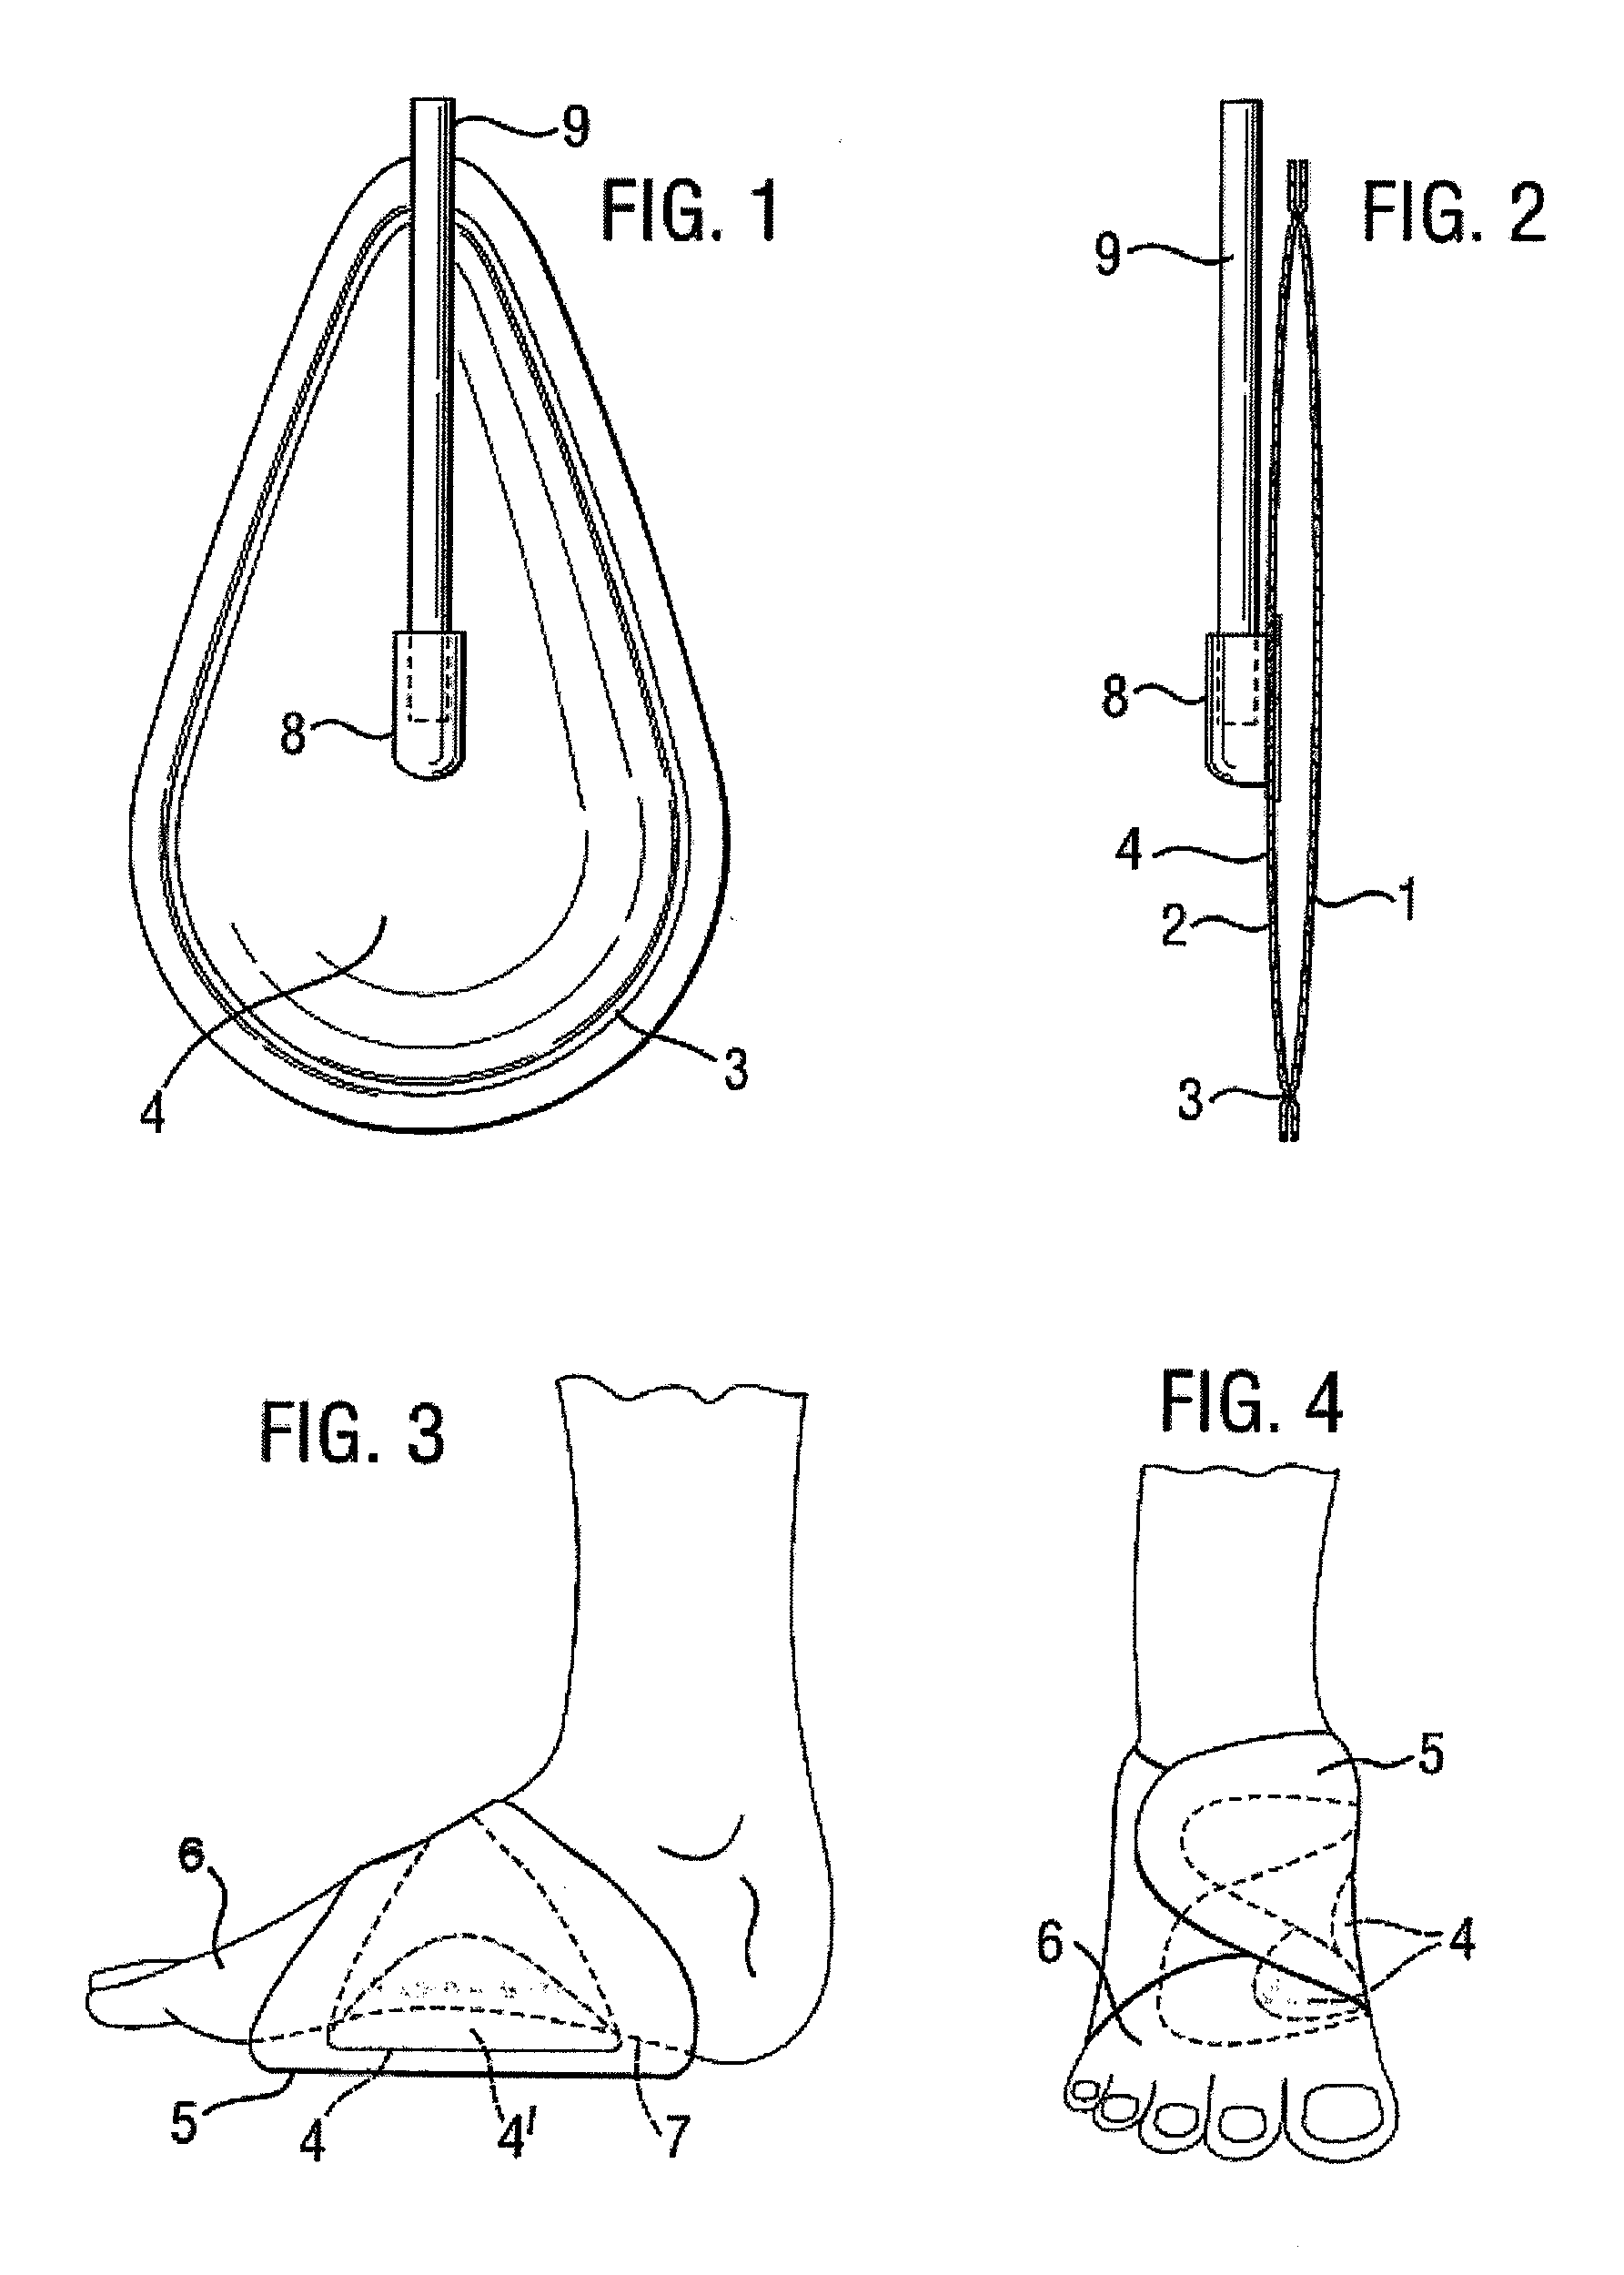 Inflatable device for use in impulse therapy